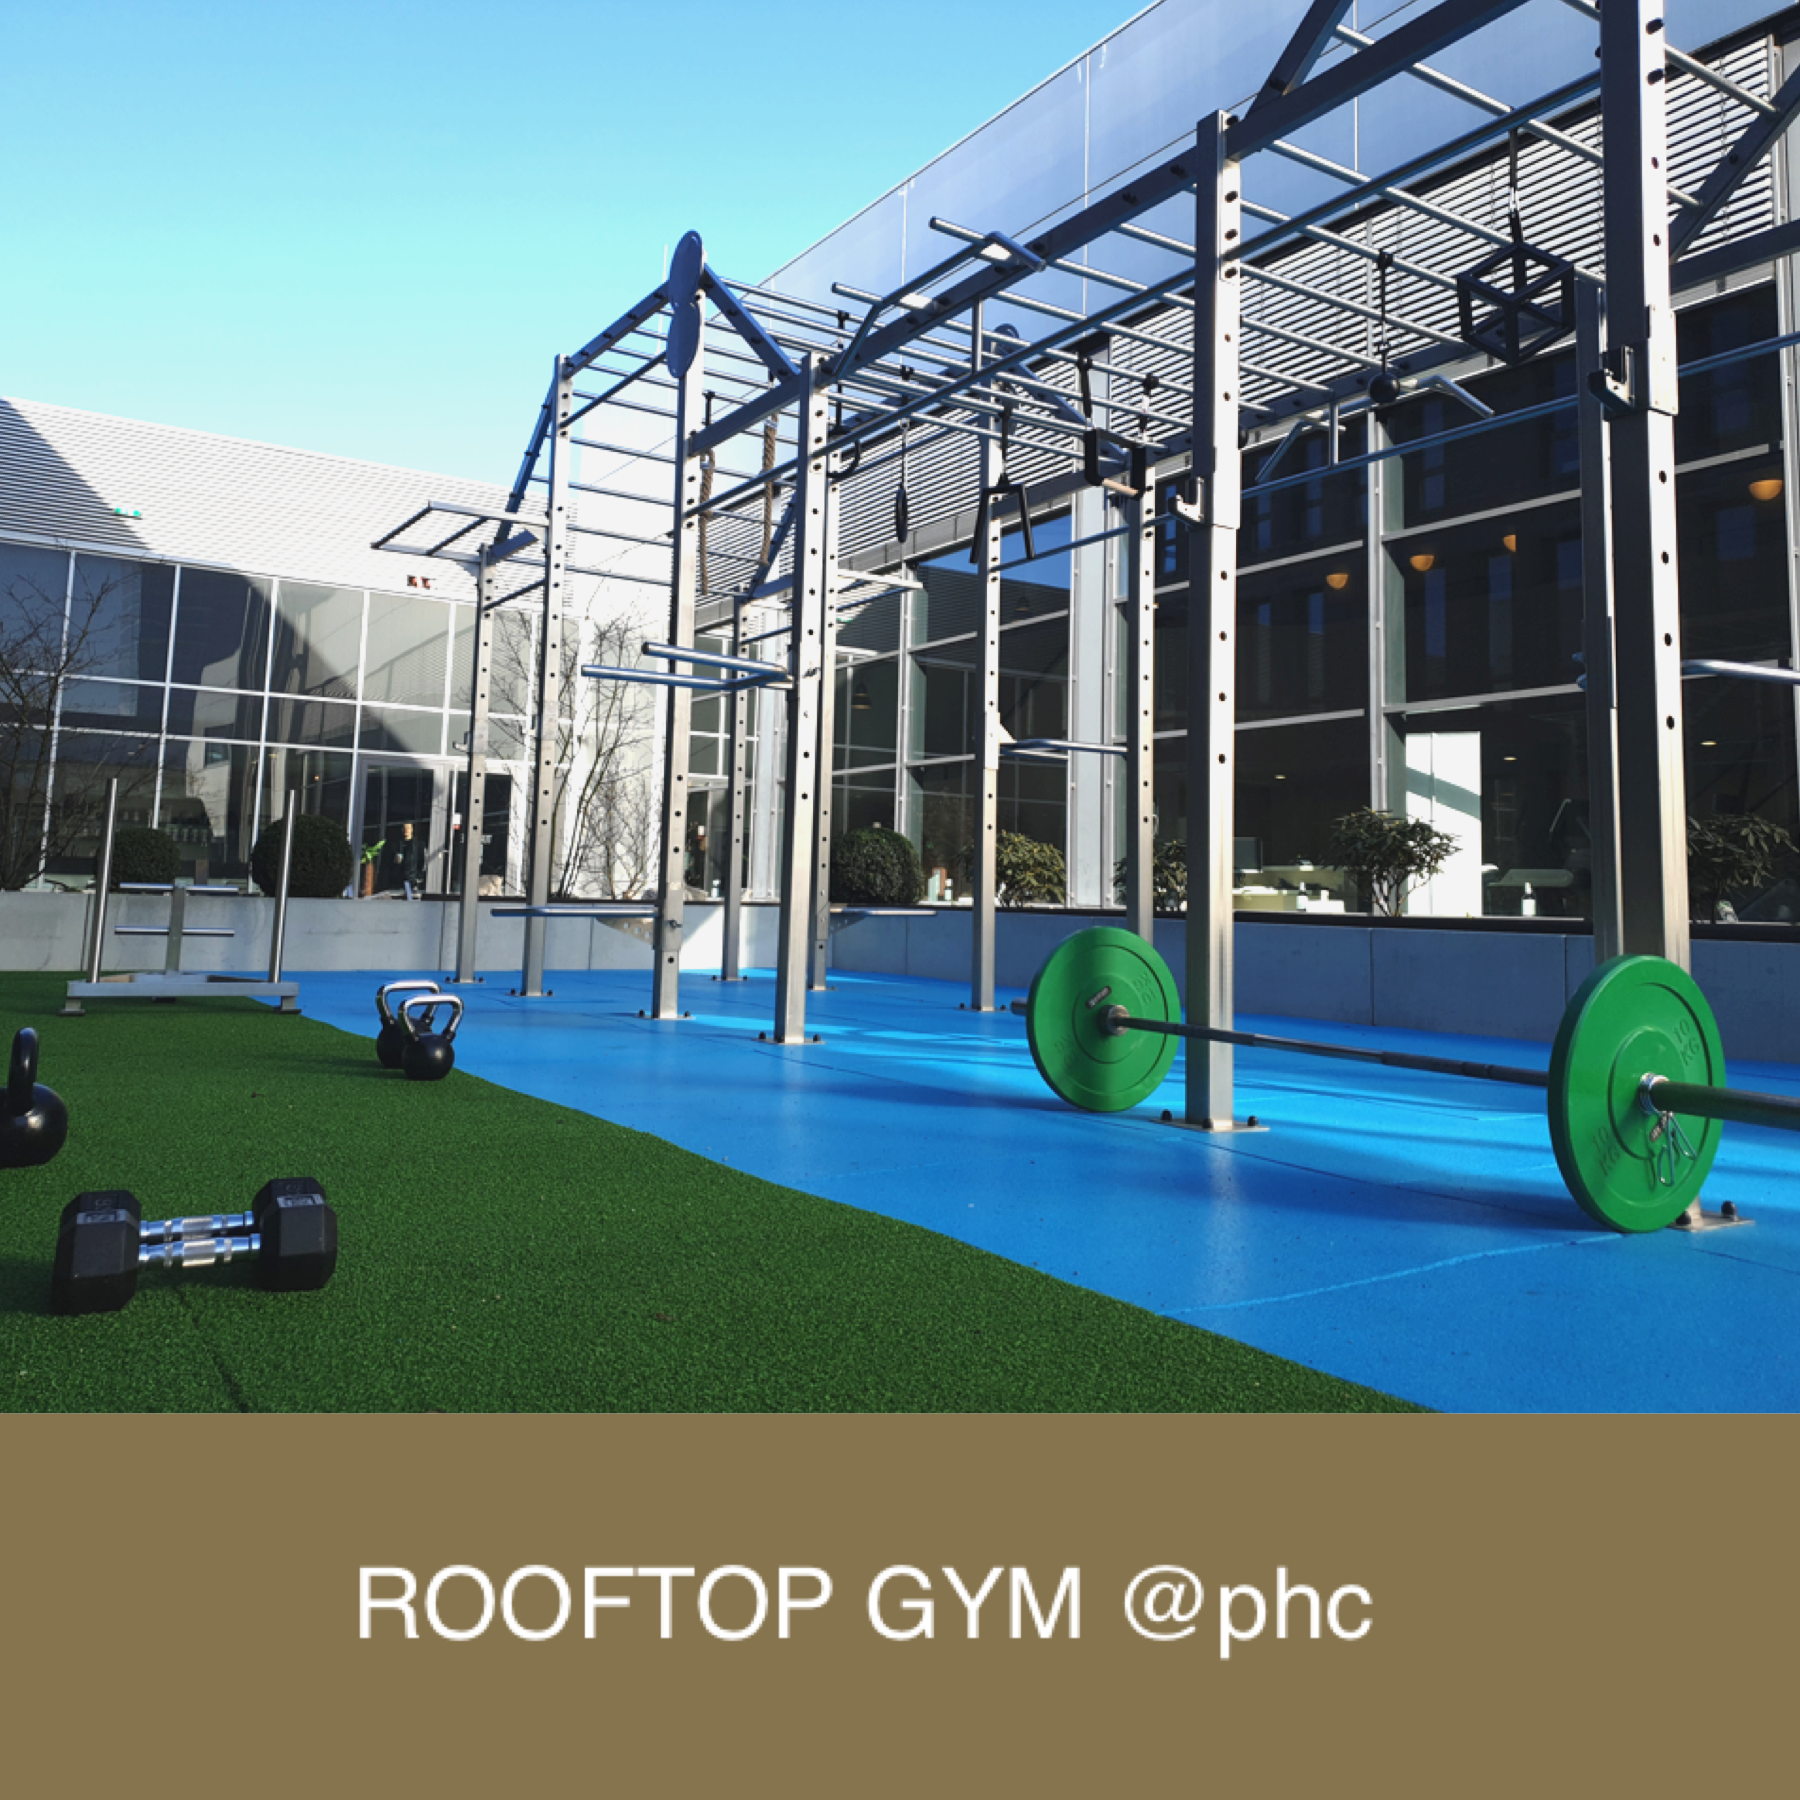 ROOFTOP GYM @phc